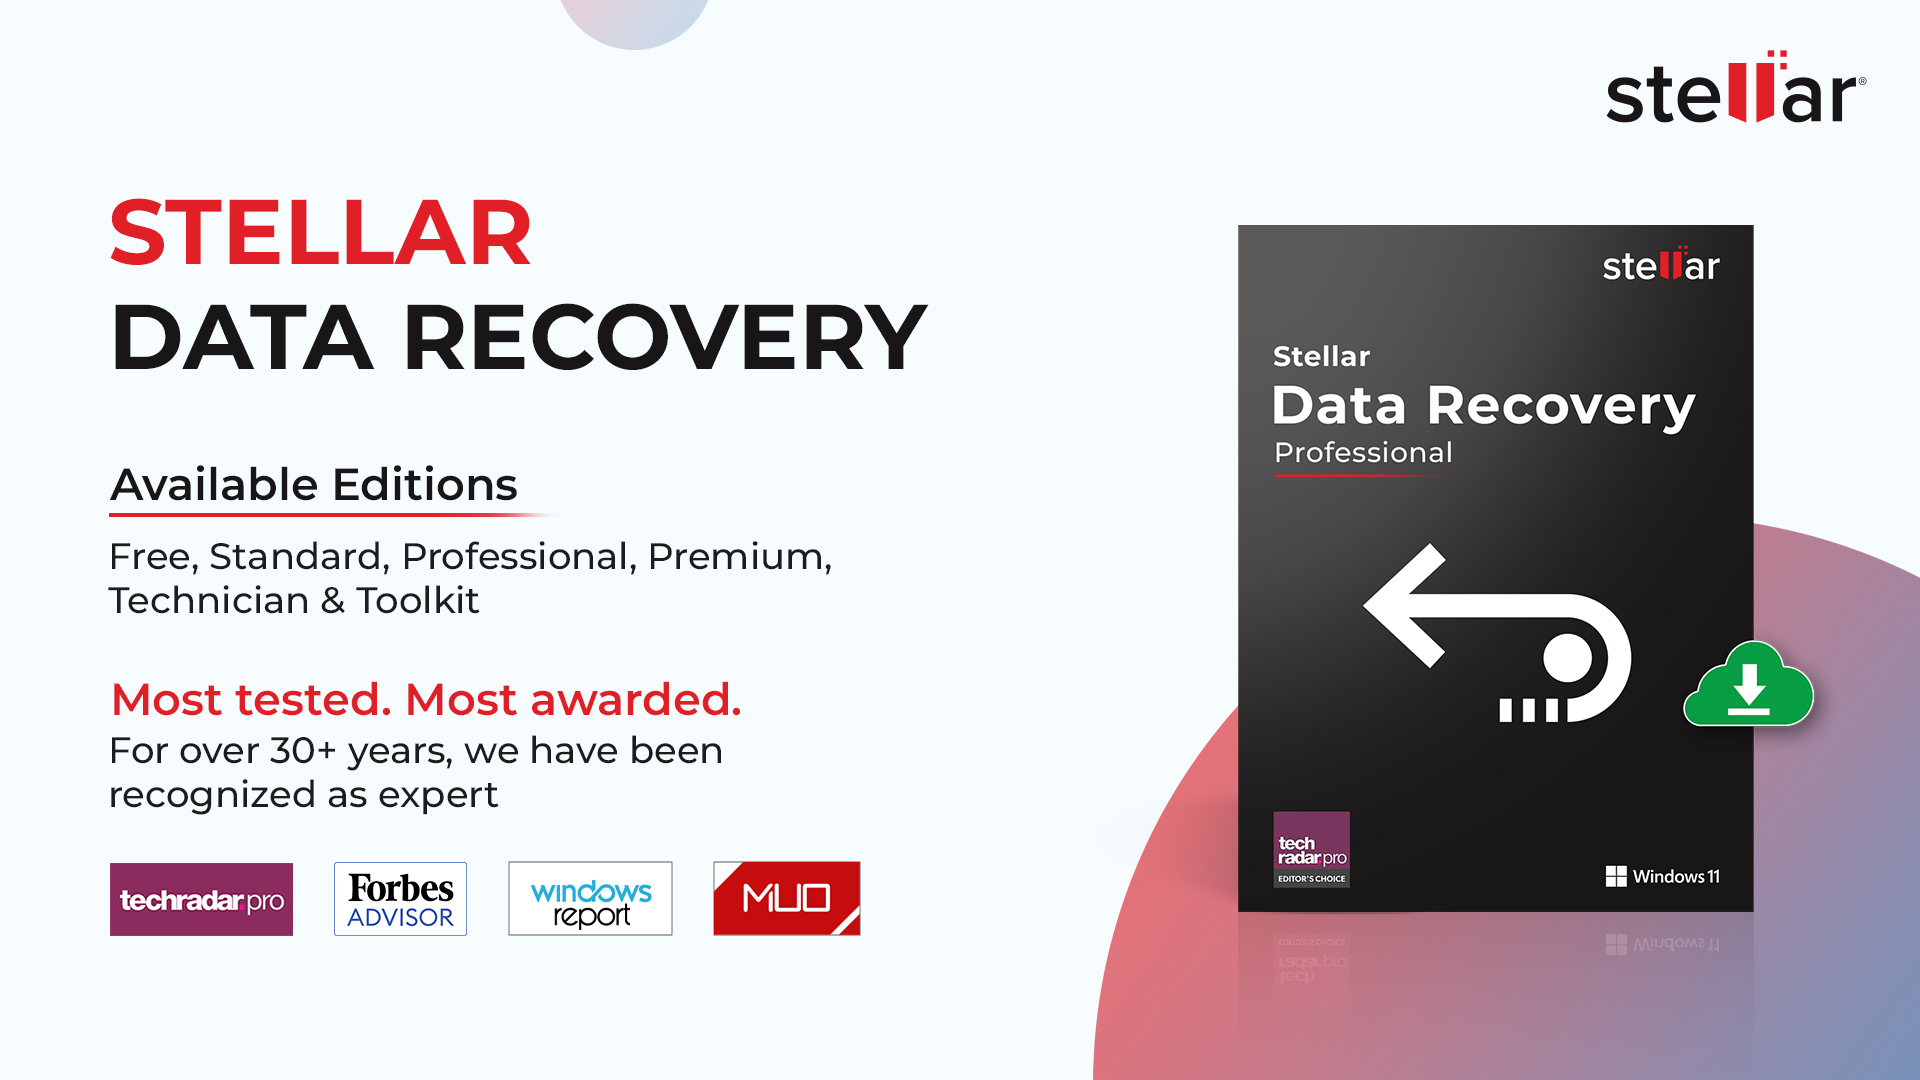 Review Of Stellar Data Recovery Professional For Windows 